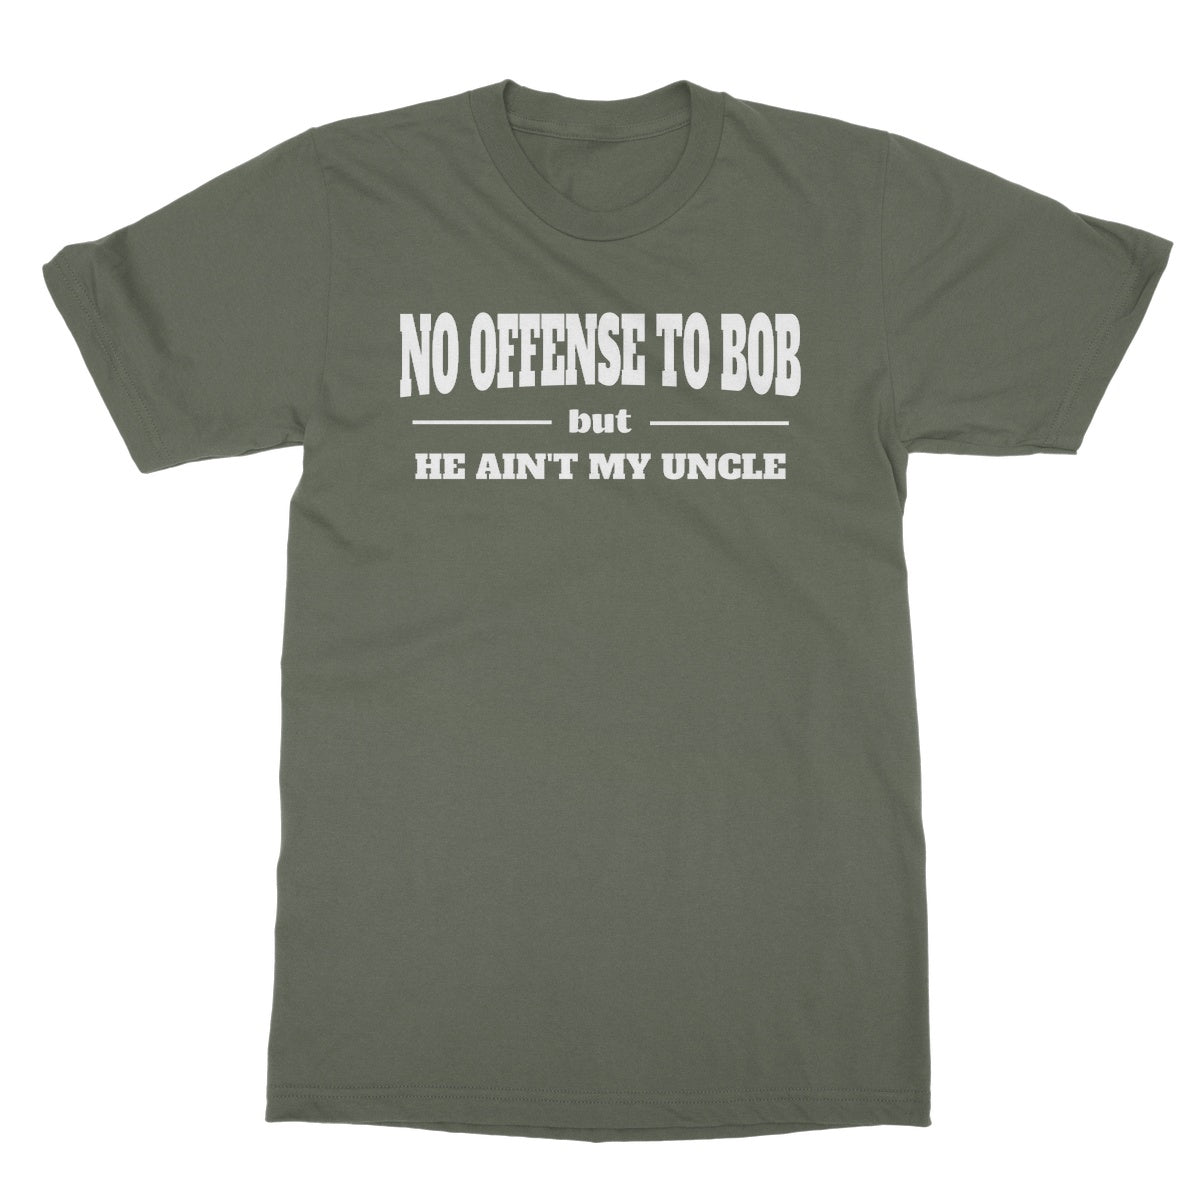 bob is not my uncle t shirt green